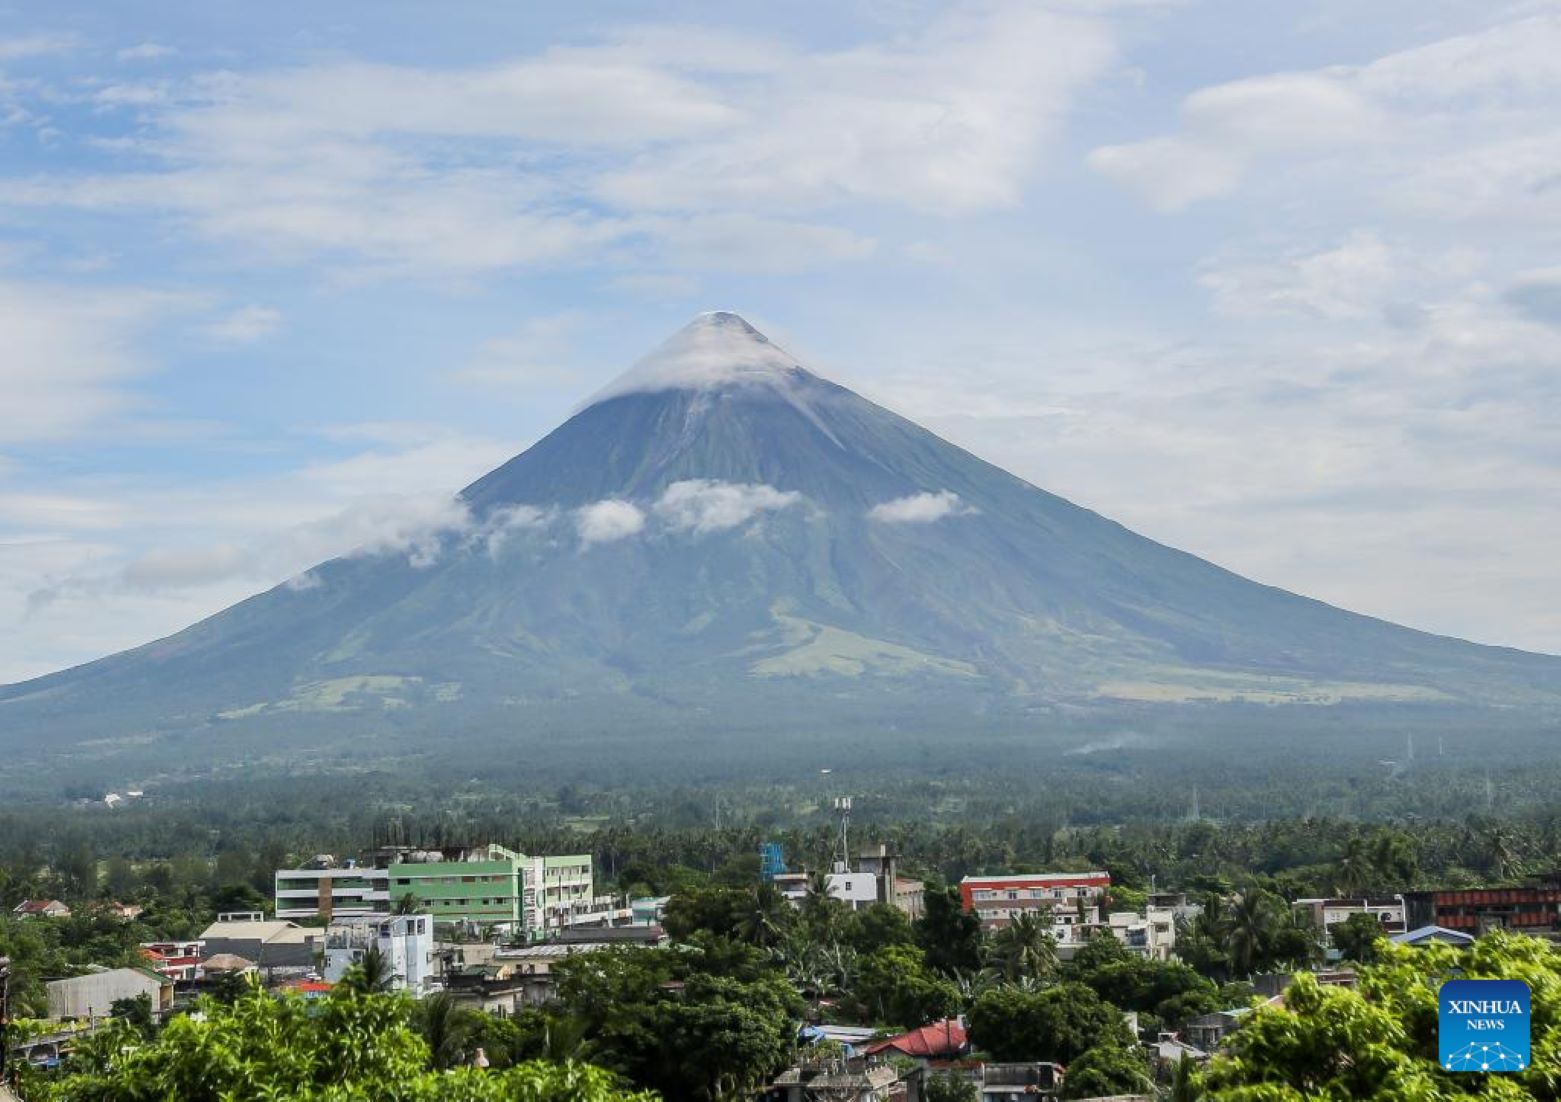 Philippines’ Erupting Mayon Volcano Reports More Seismic Activities